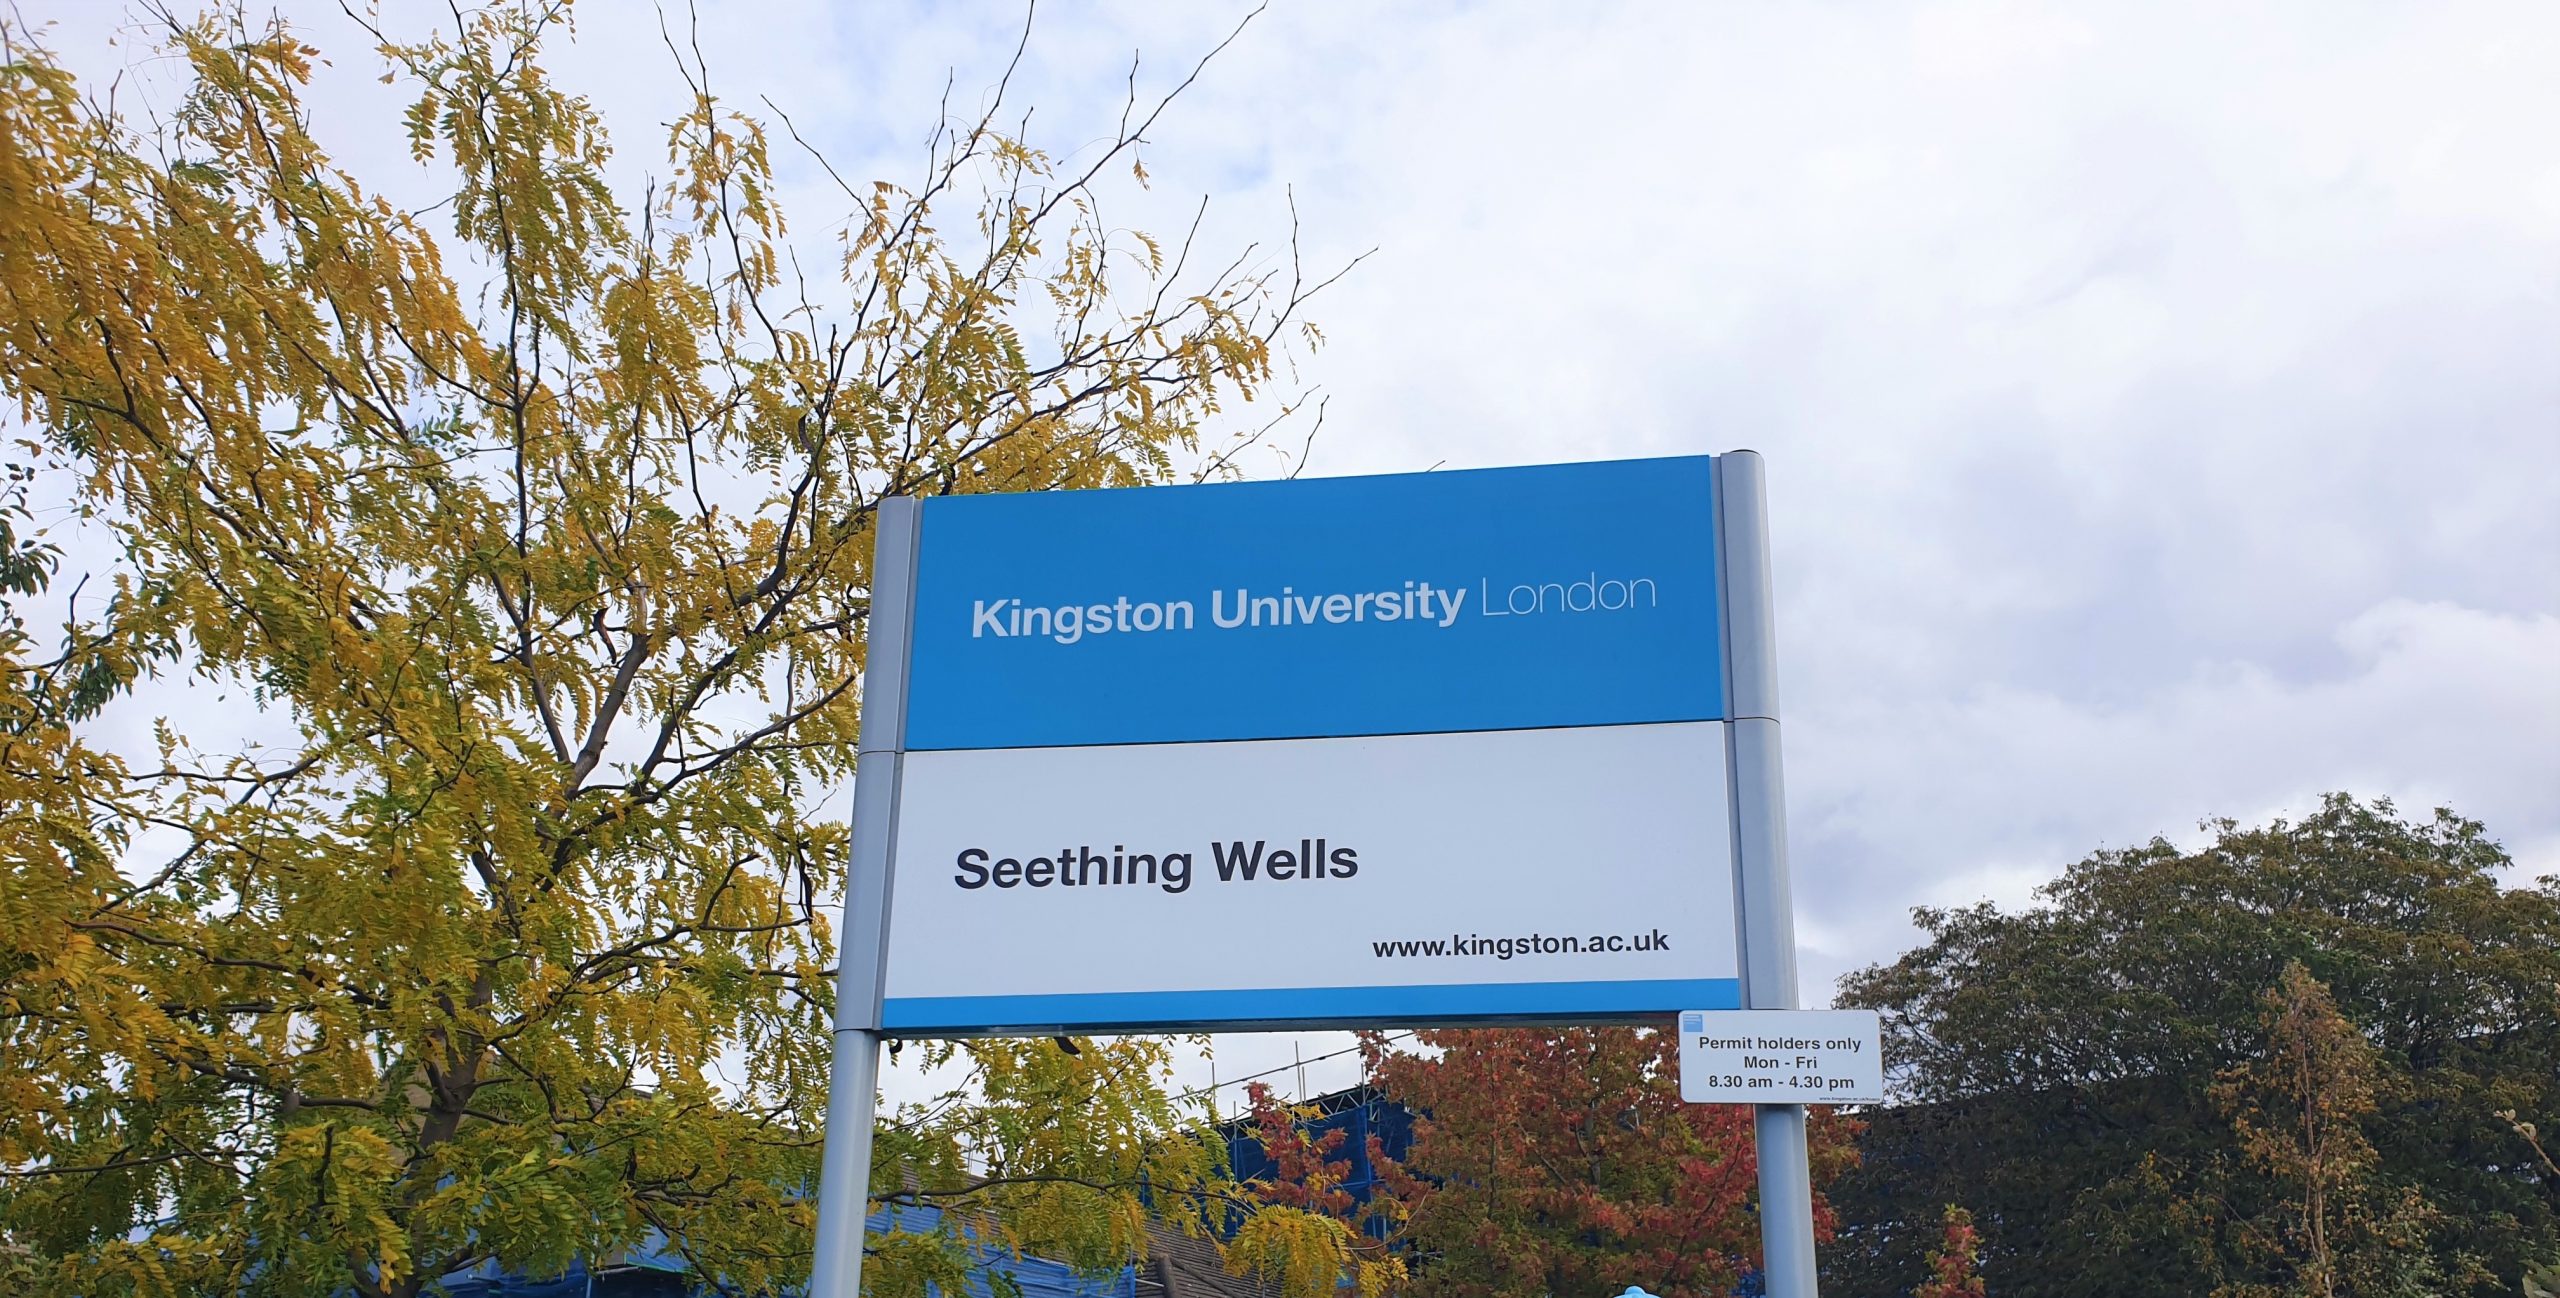 Kingston University security staff to get diversity training following transphobic incident